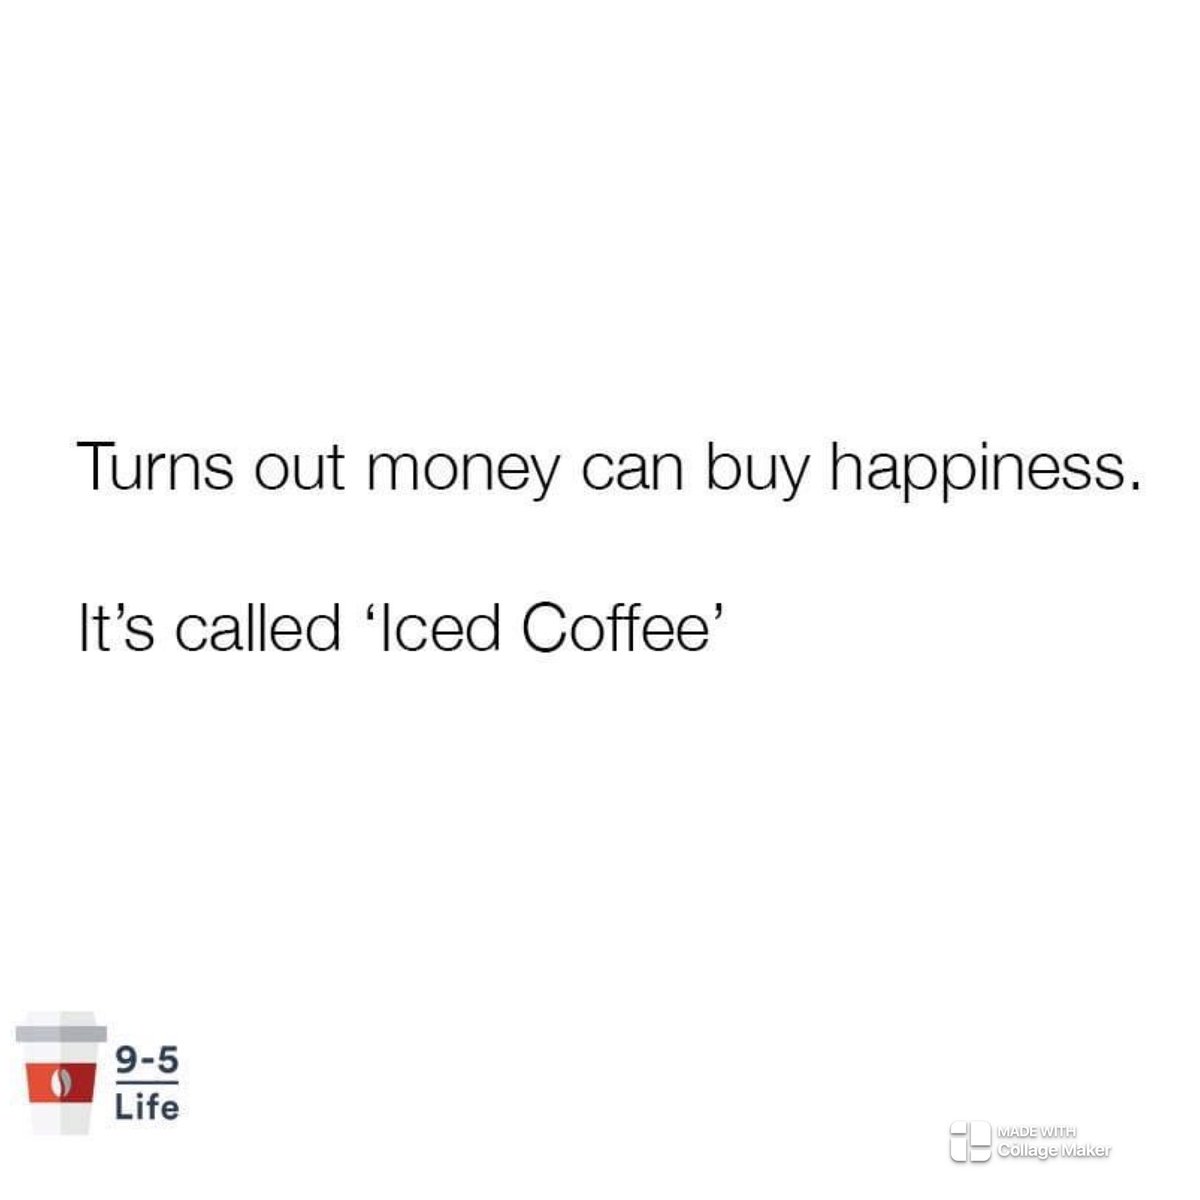 Already dreaming of #IcedCoffeeFriday on a Monday! #MondayMusings